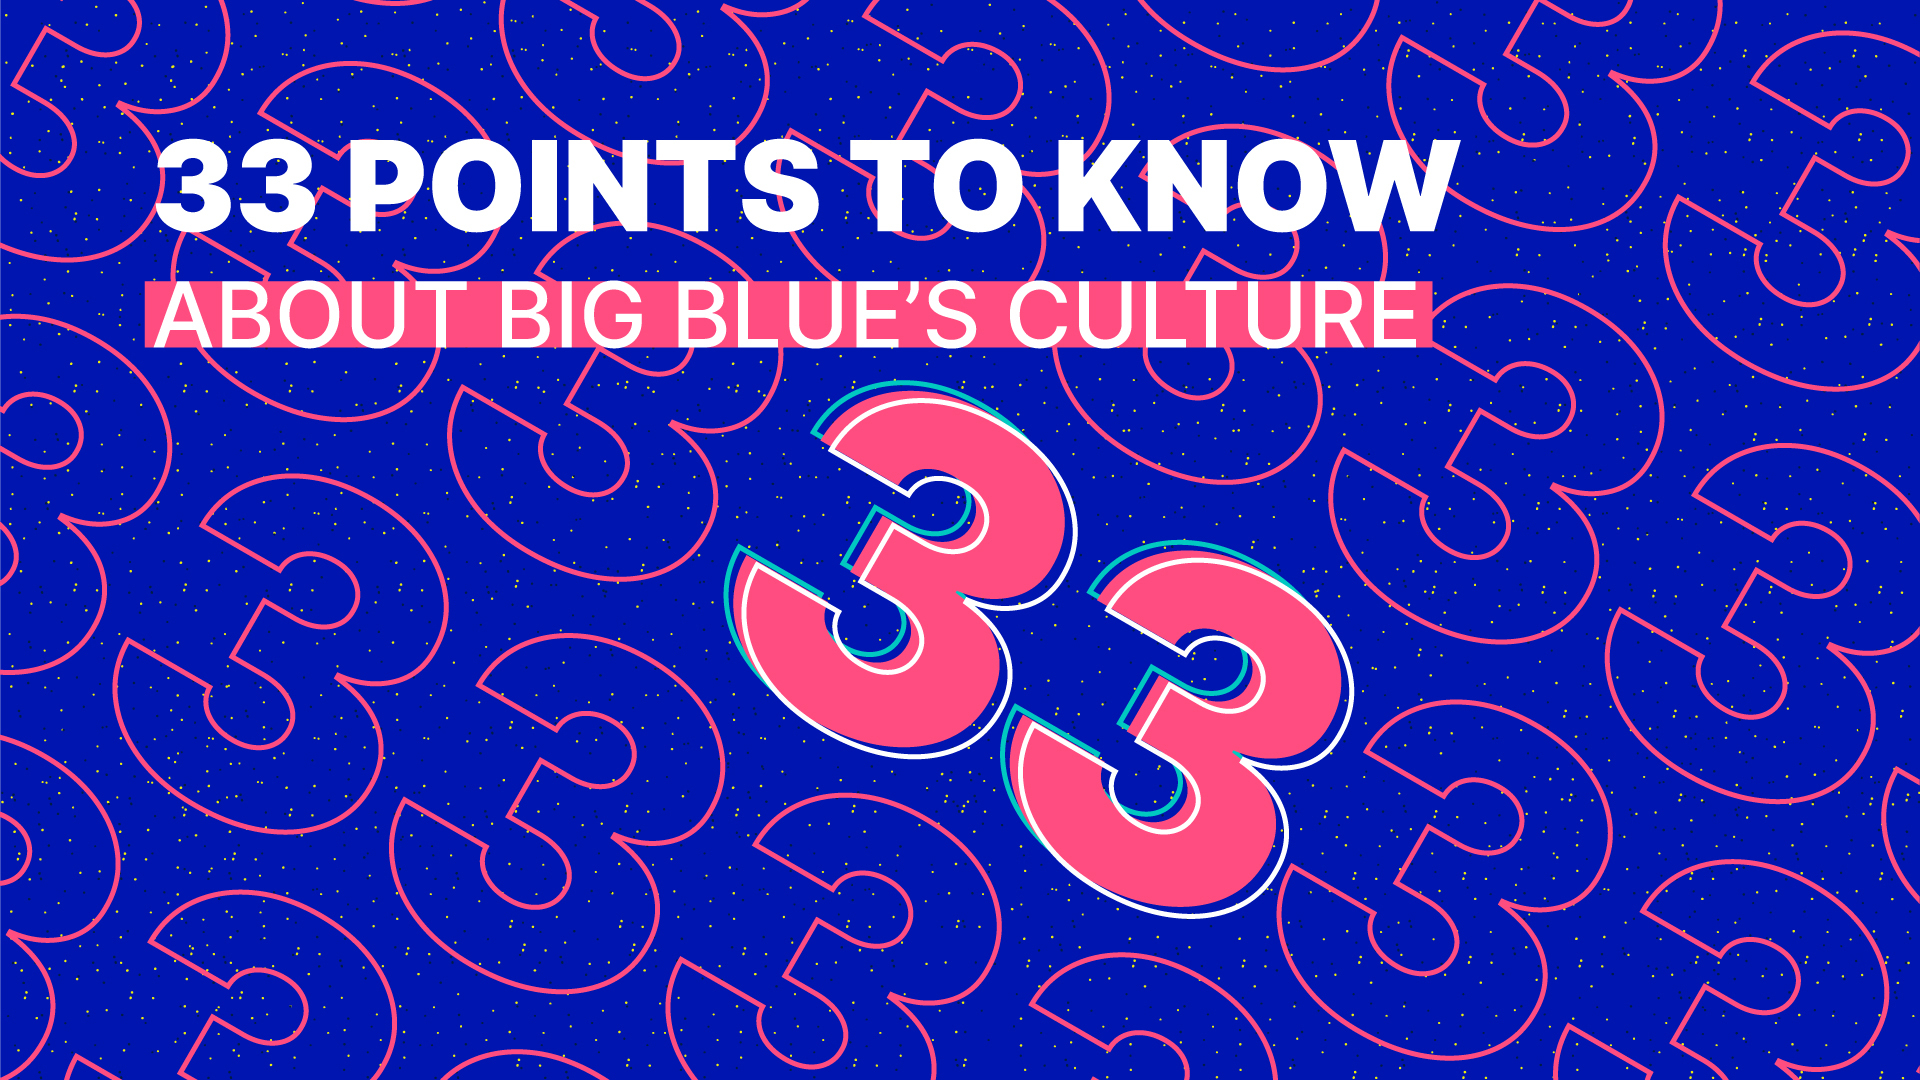 33 things to know about Big Blue’s culture